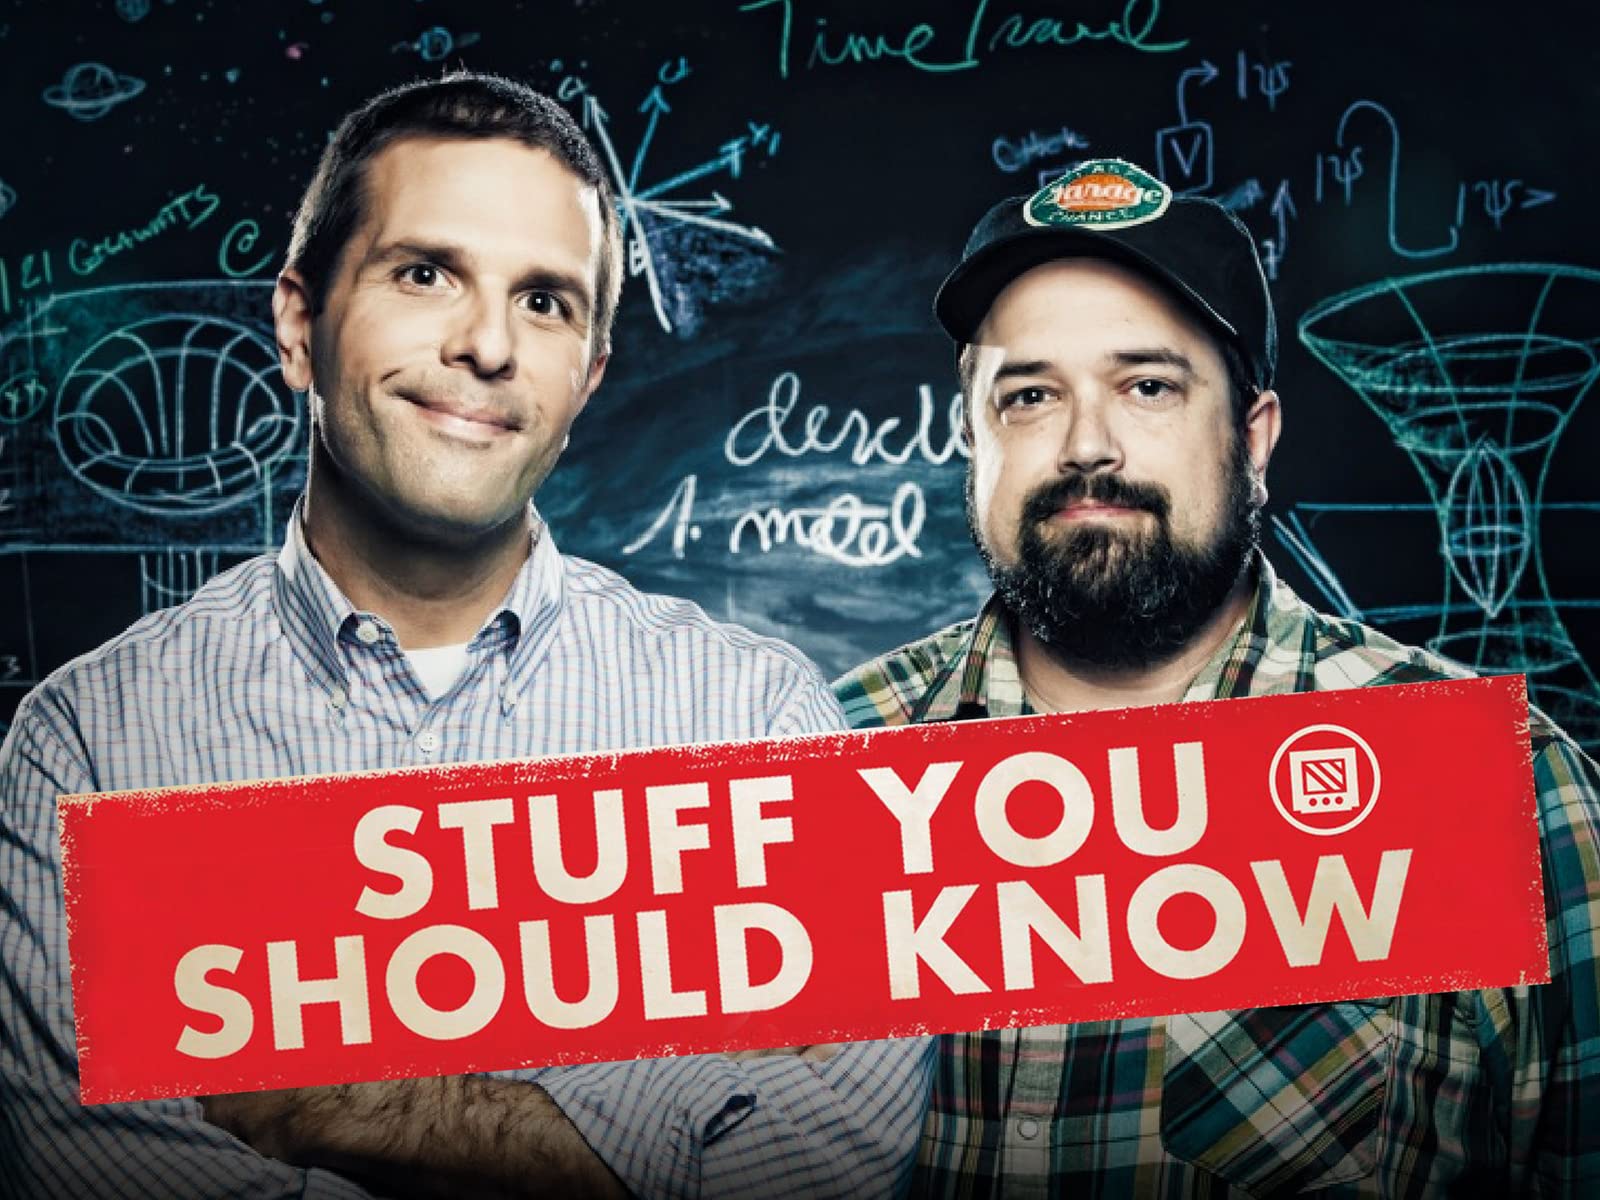 You should know about 'Stuff You Should Know'